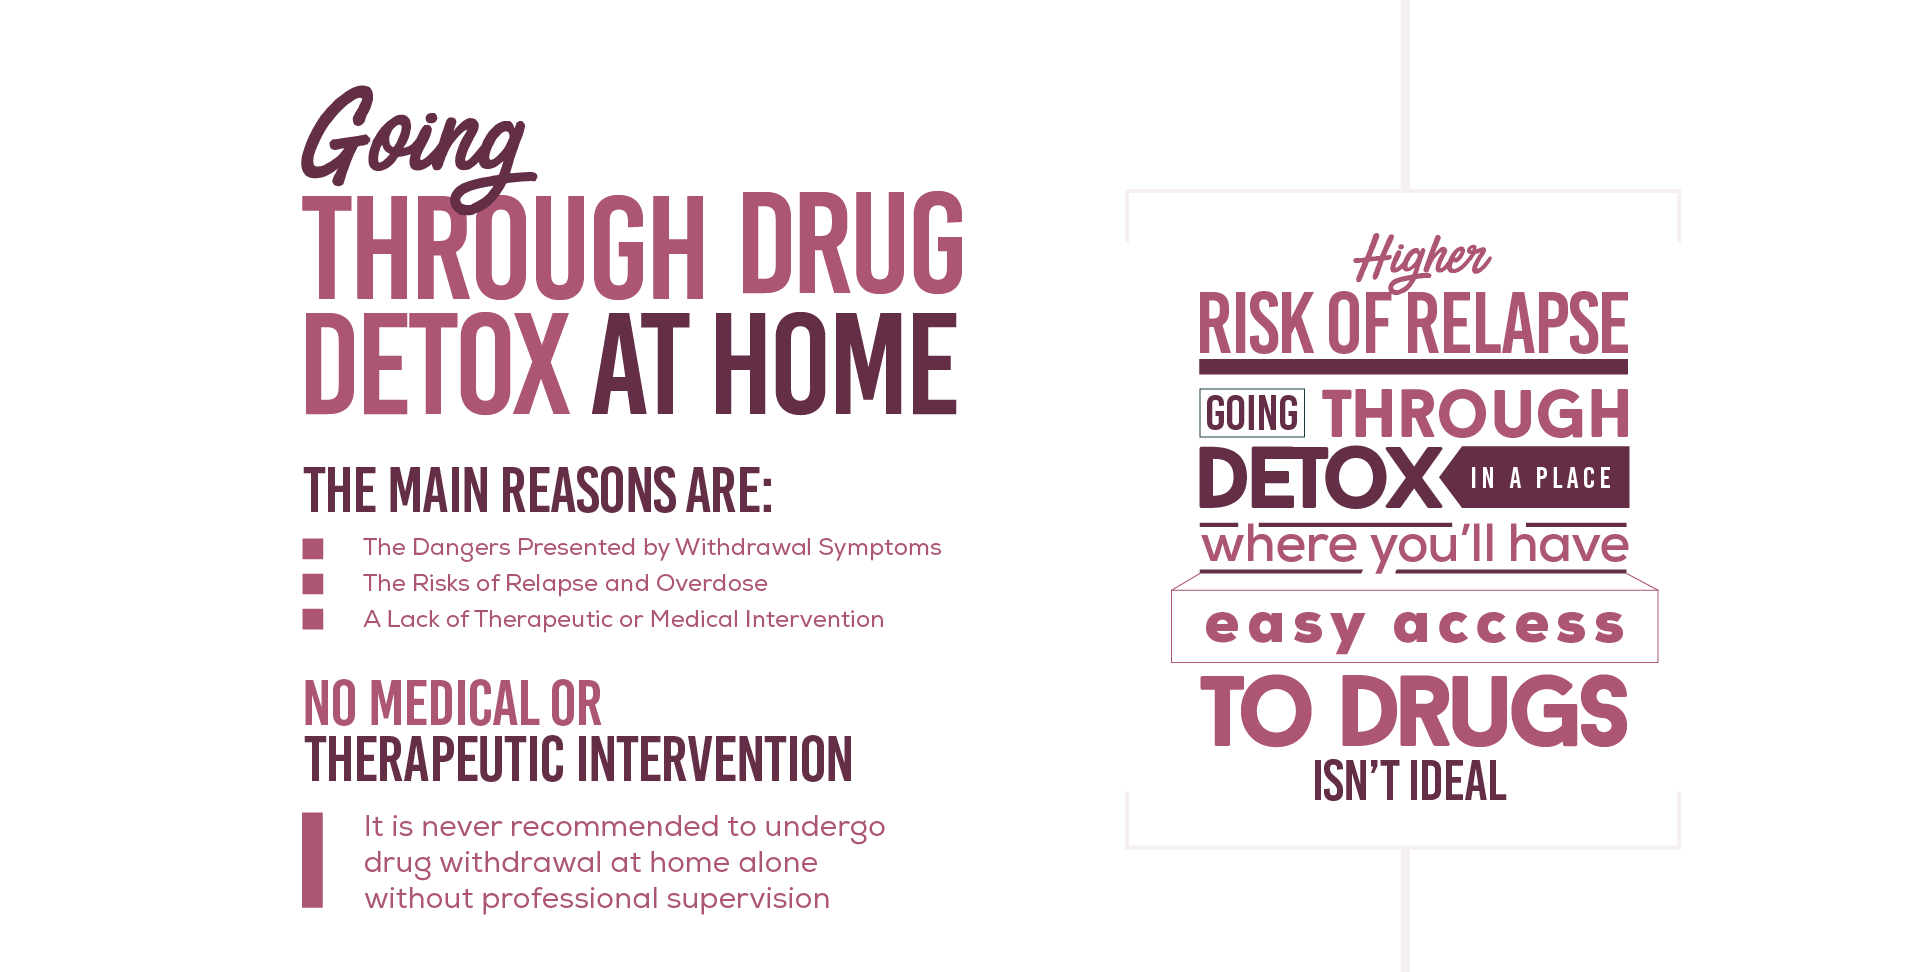 disadvantages of going through drug detox at home includes, the dangers presented by withdrawal symptoms, the risks of relapse and overdose, a lack of therapeutic or medical intervention. It is never recommended to undergo drug withdrawal at home alone without professional supervision. Going through detox in a place where you will have easy access to drugs is not ideal.